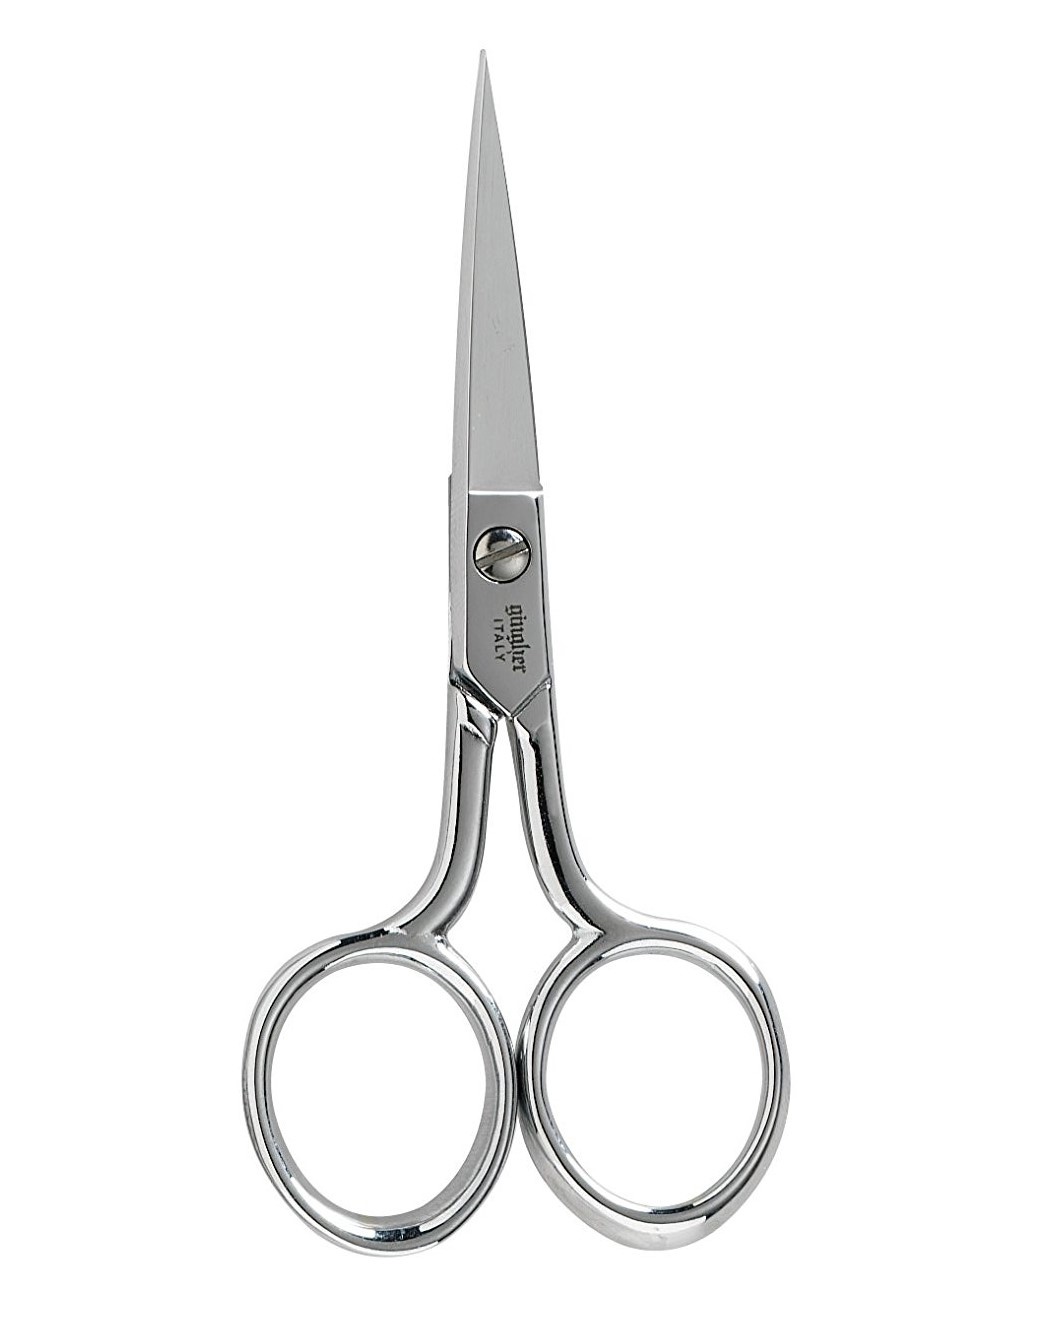 Gingher 4 Embroidery Scissor 